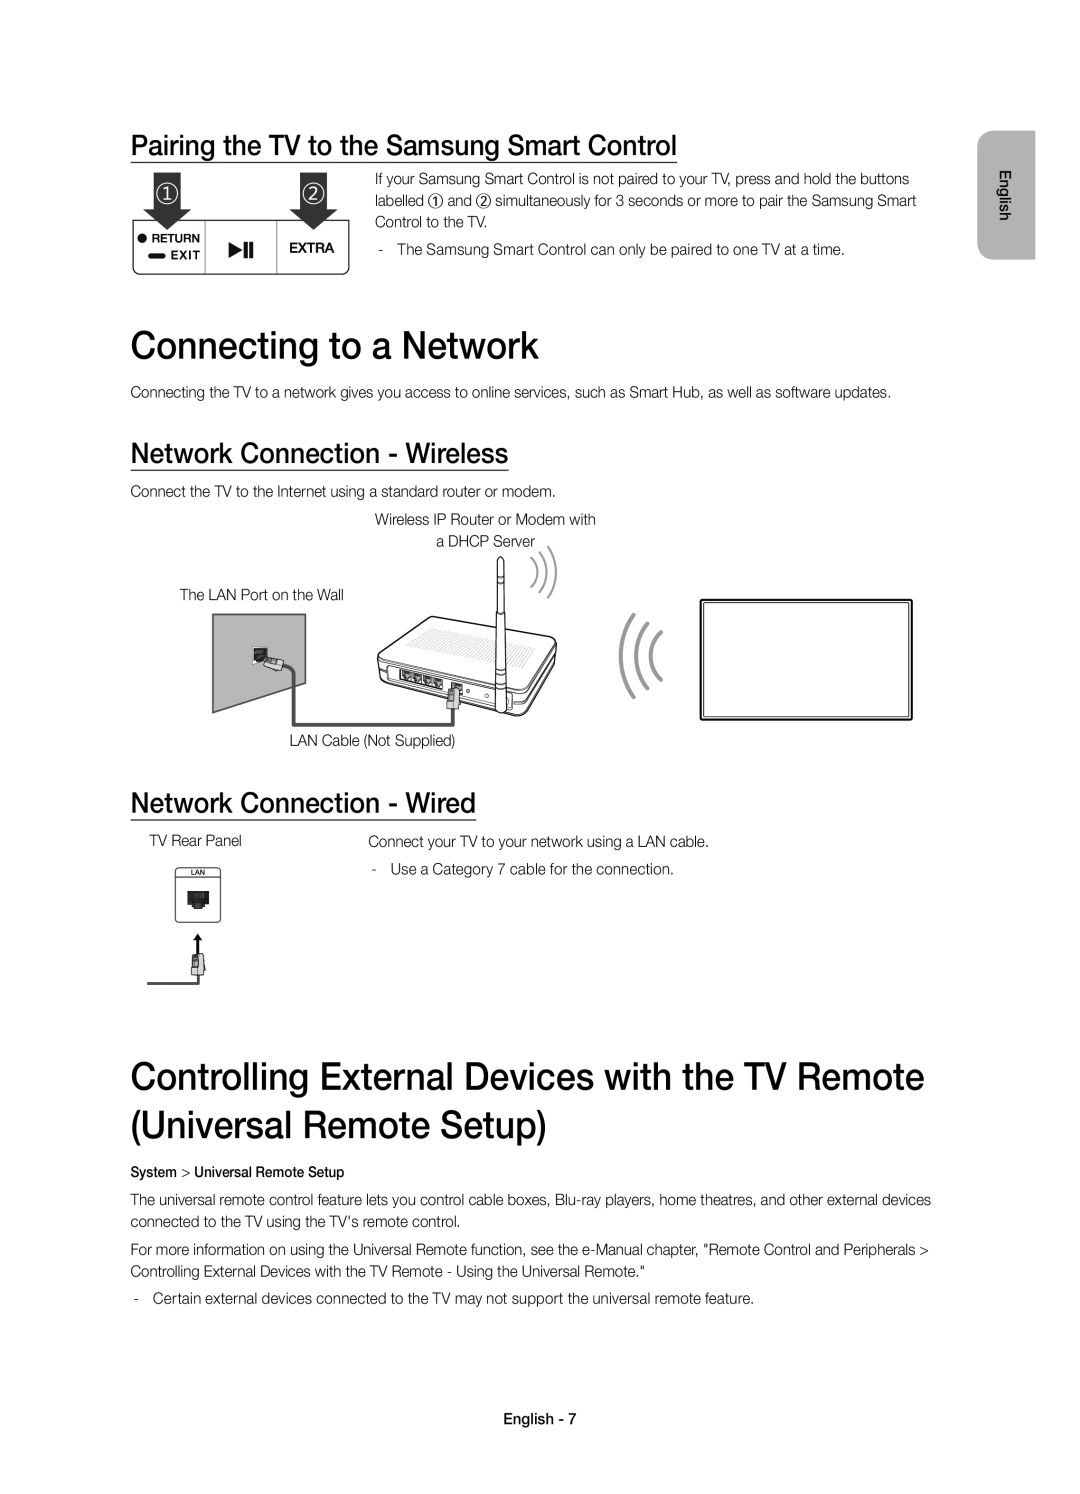 Samsung UE40JU6770UXZG Connecting to a Network, Pairing the TV to the Samsung Smart Control, Network Connection - Wireless 